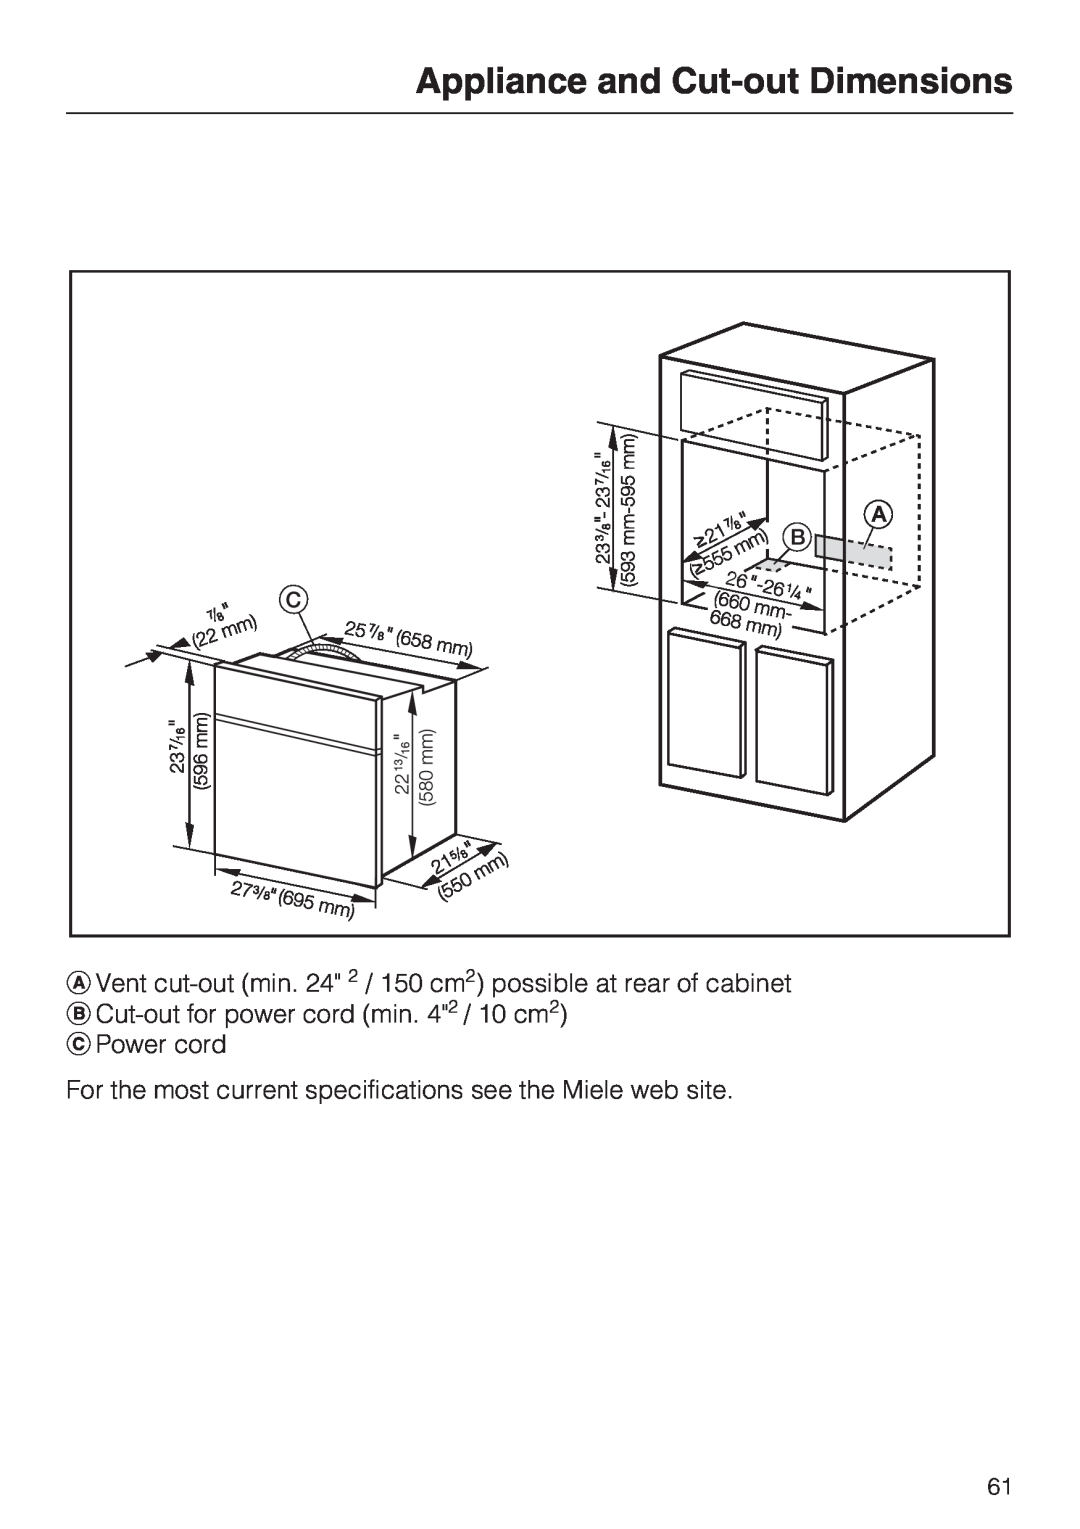 Miele H 4746 BP, H 4744 BP Appliance and Cut-out Dimensions, Vent cut-out min. 24 2 / 150 cm2 possible at rear of cabinet 